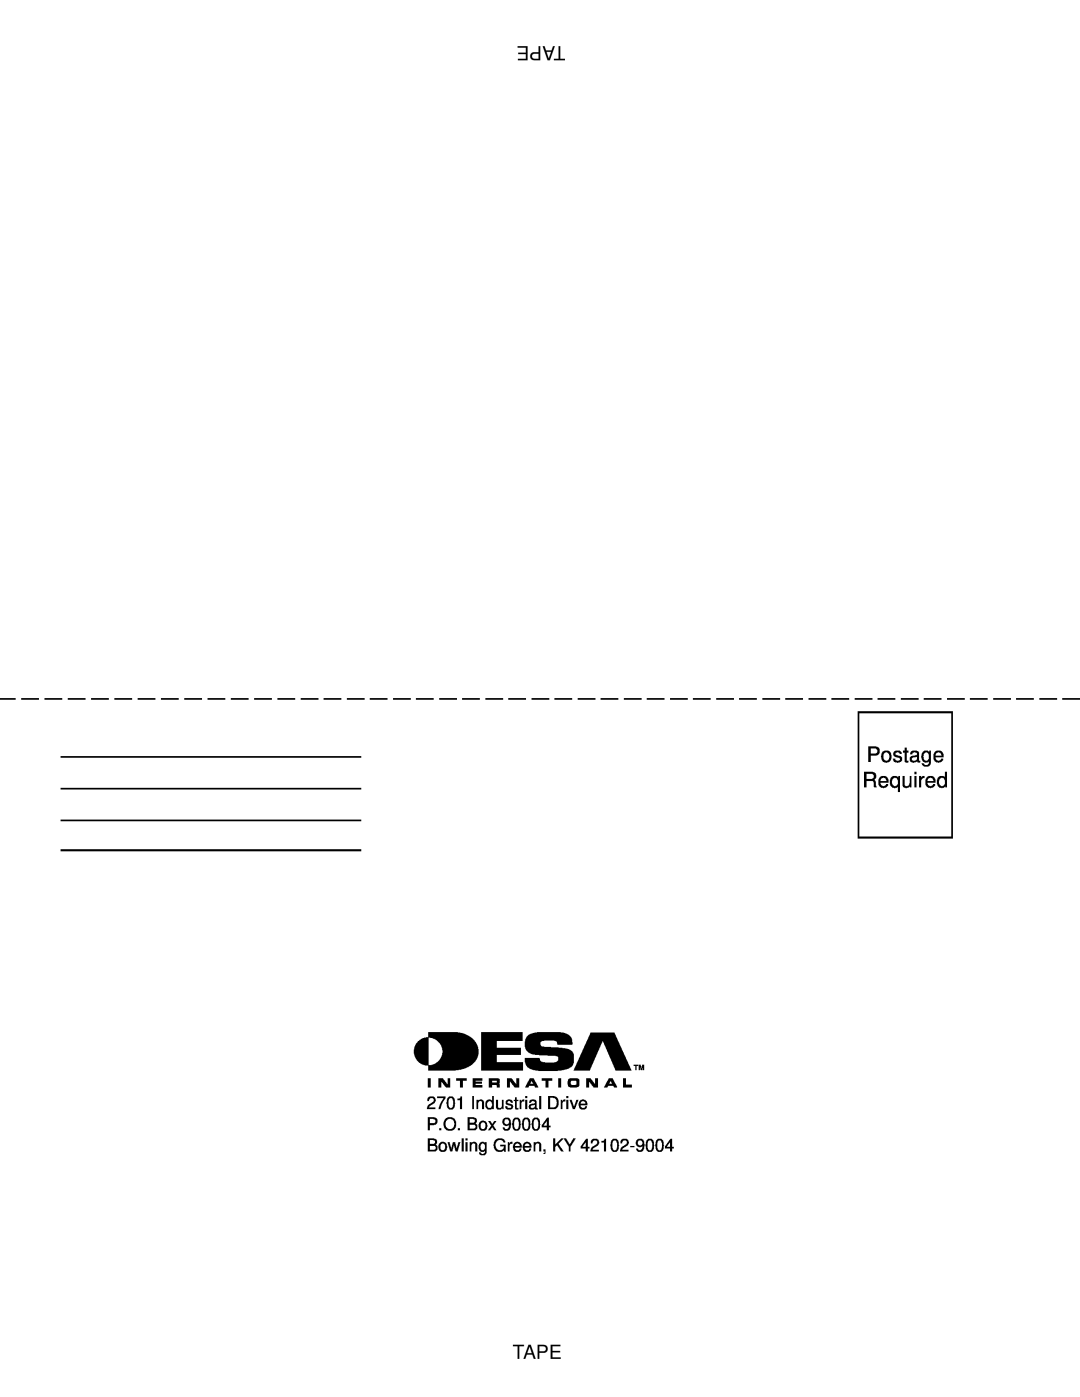 Desa ROPANE CONSTRUCTION HEATER owner manual Postage Required, Tape, Industrial Drive P.O. Box Bowling Green, KY 